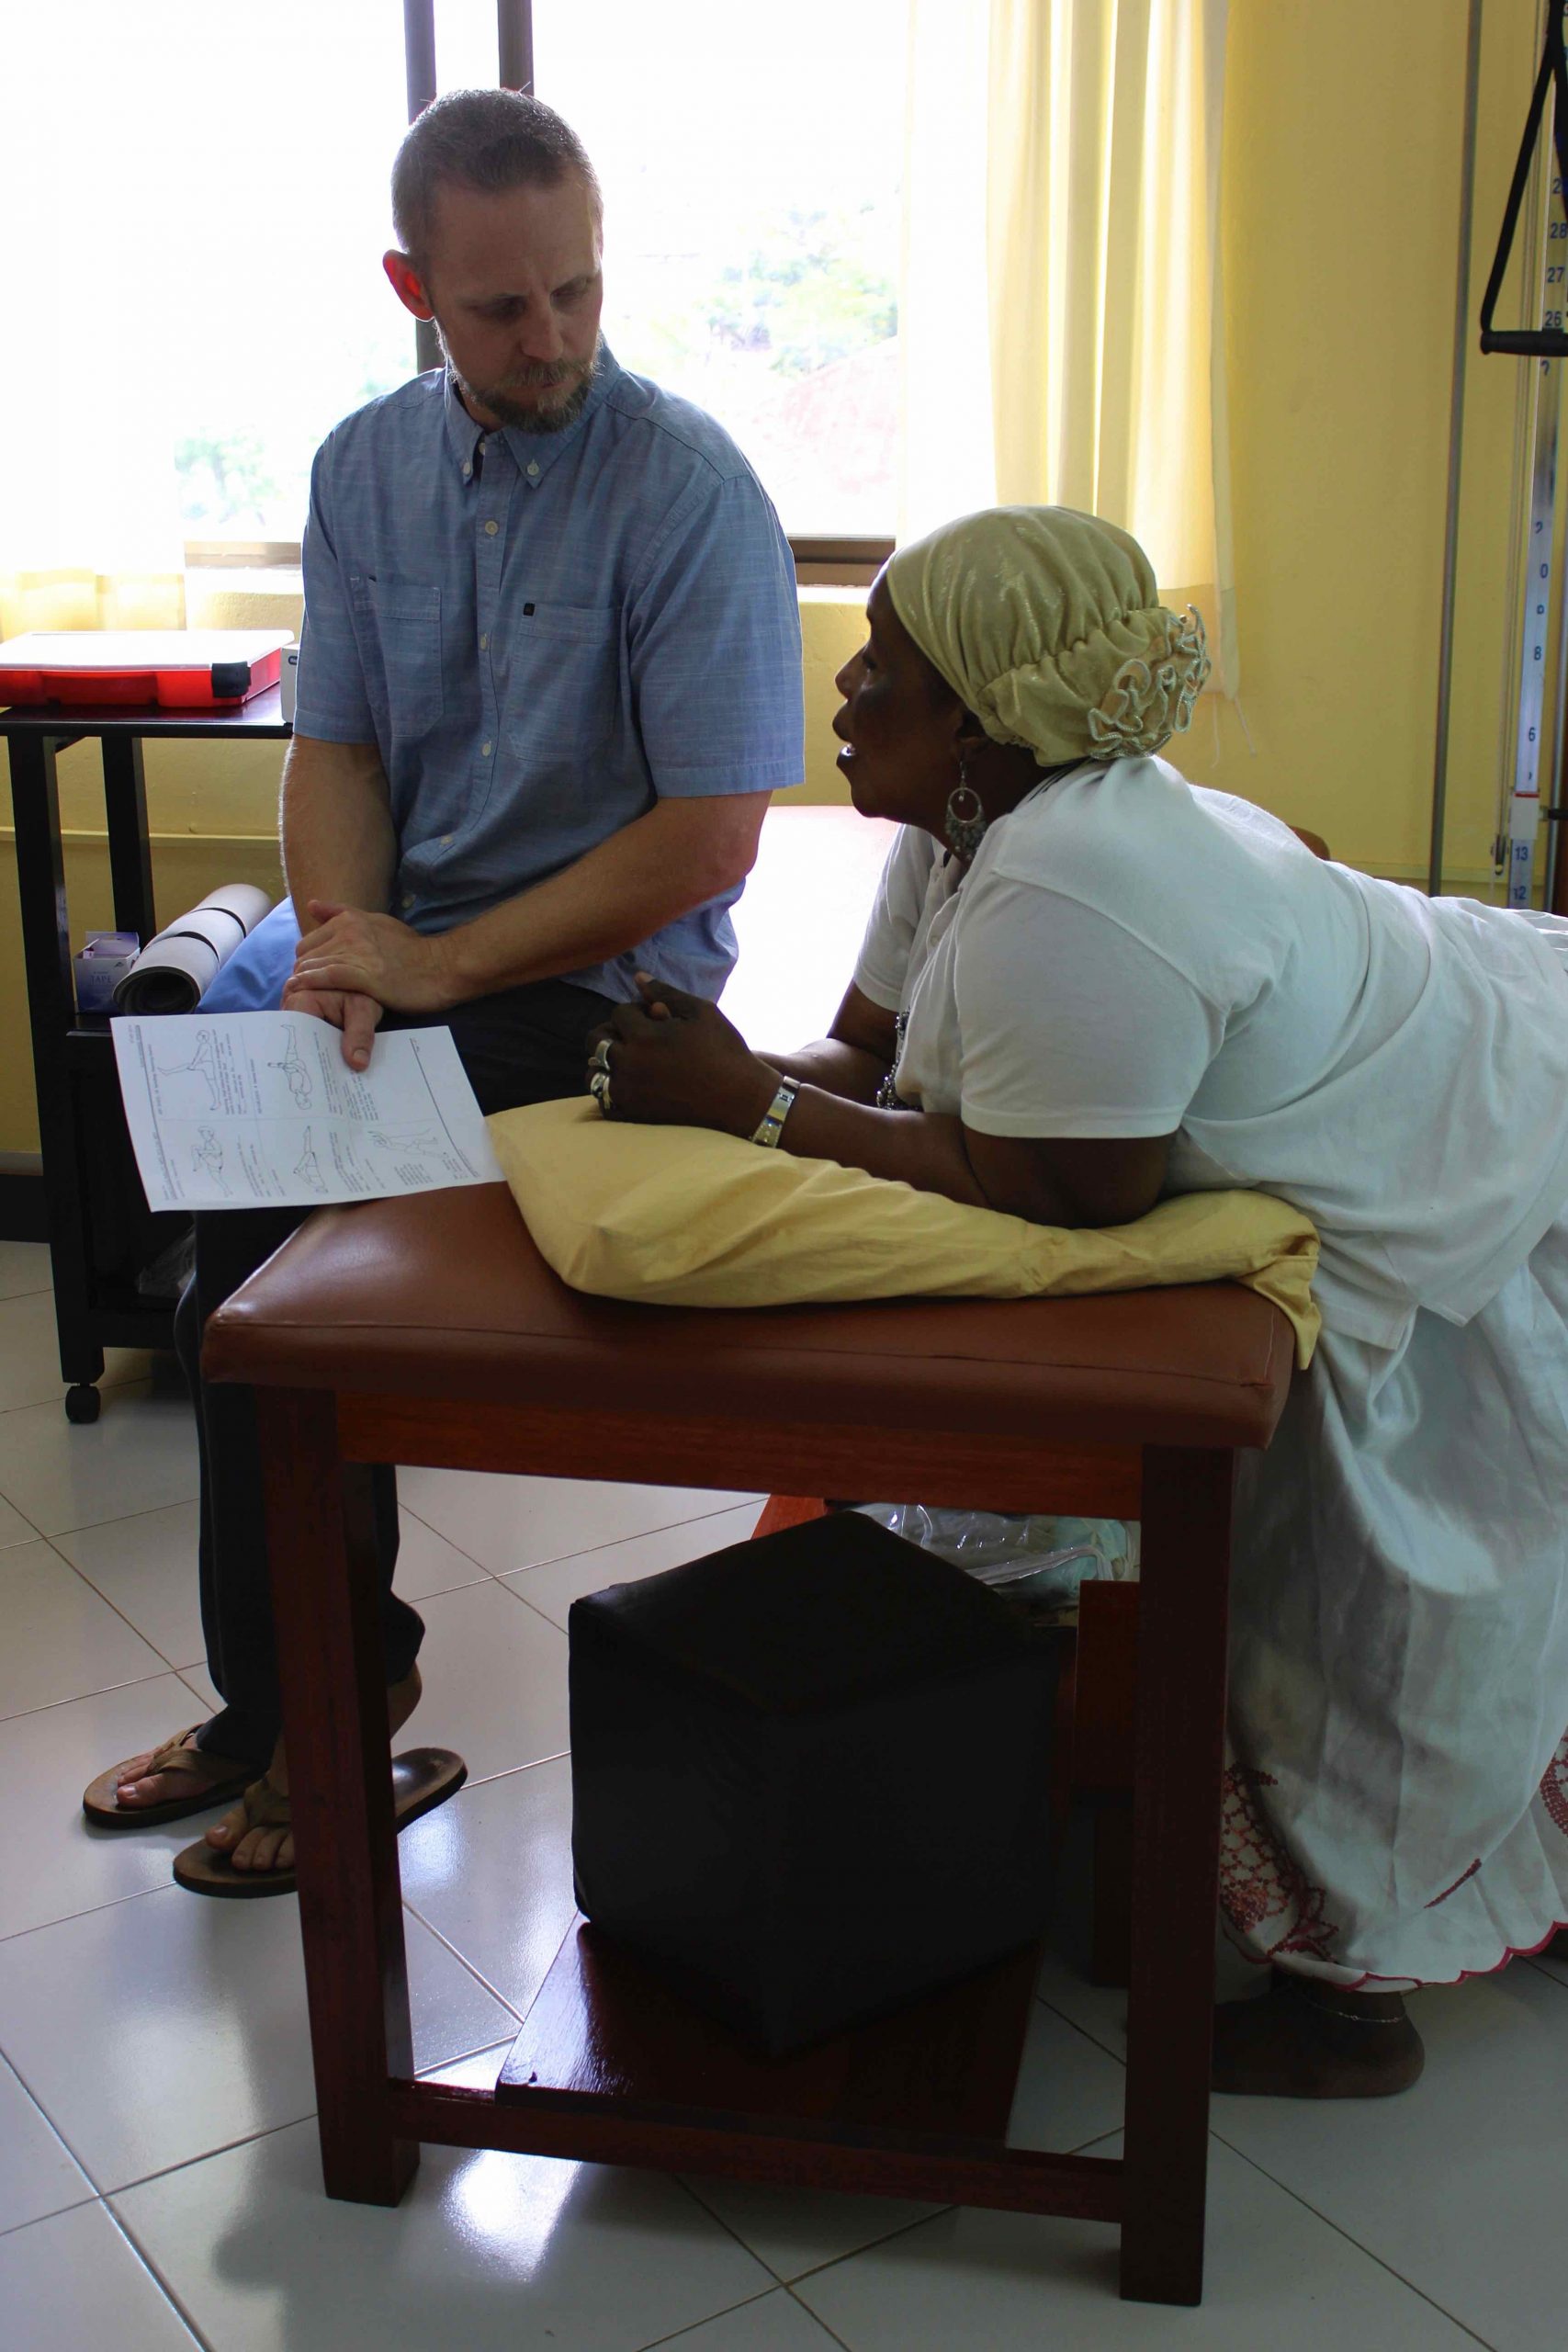 At his clinic in Tanzania, Dr. Salley helps his patients regain health and mobility.